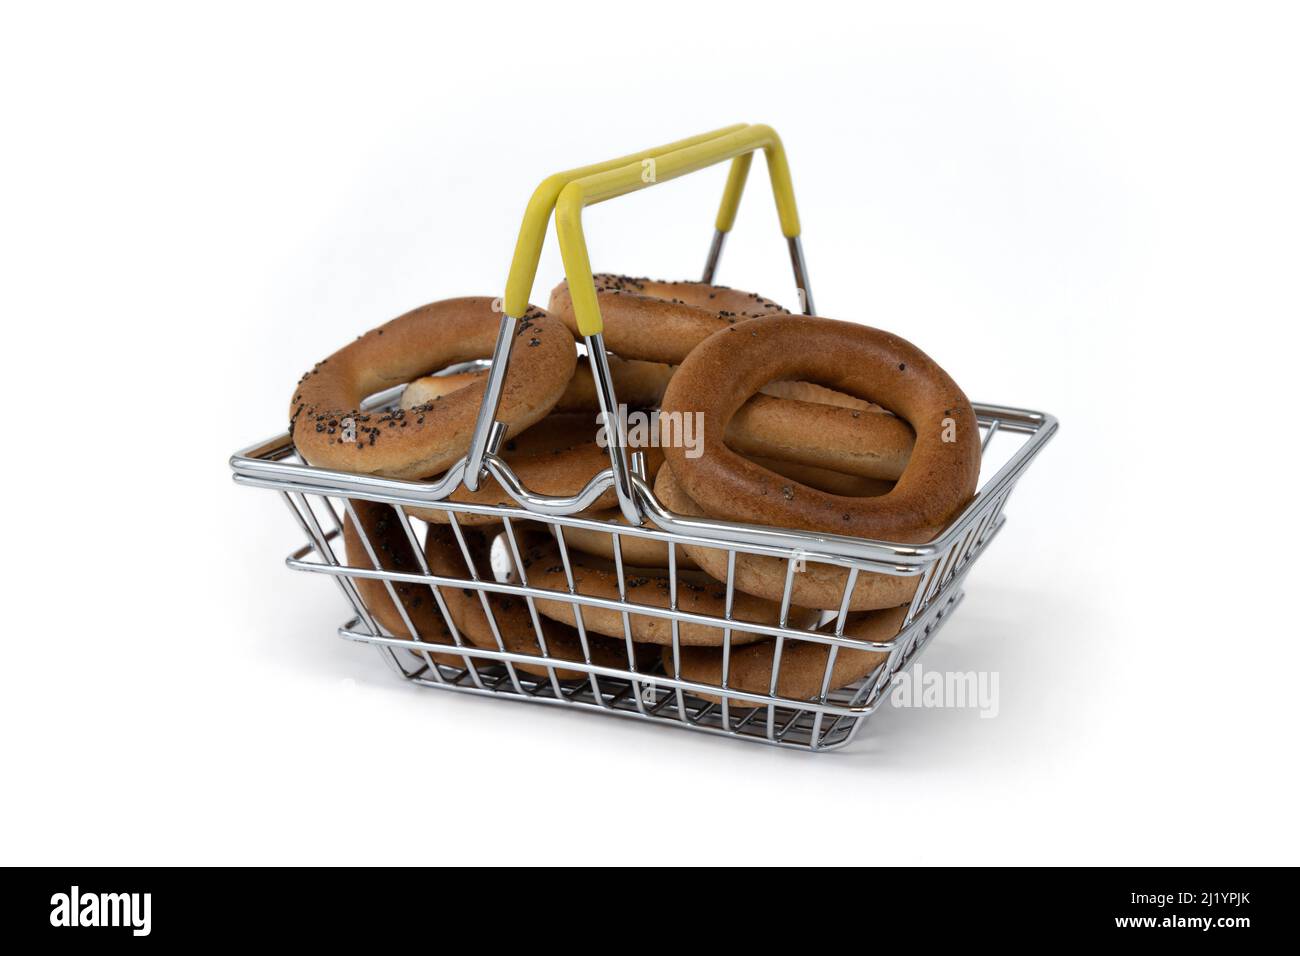 bagels with poppy in basket isolated on white background, side view, food market bakery concept Stock Photo